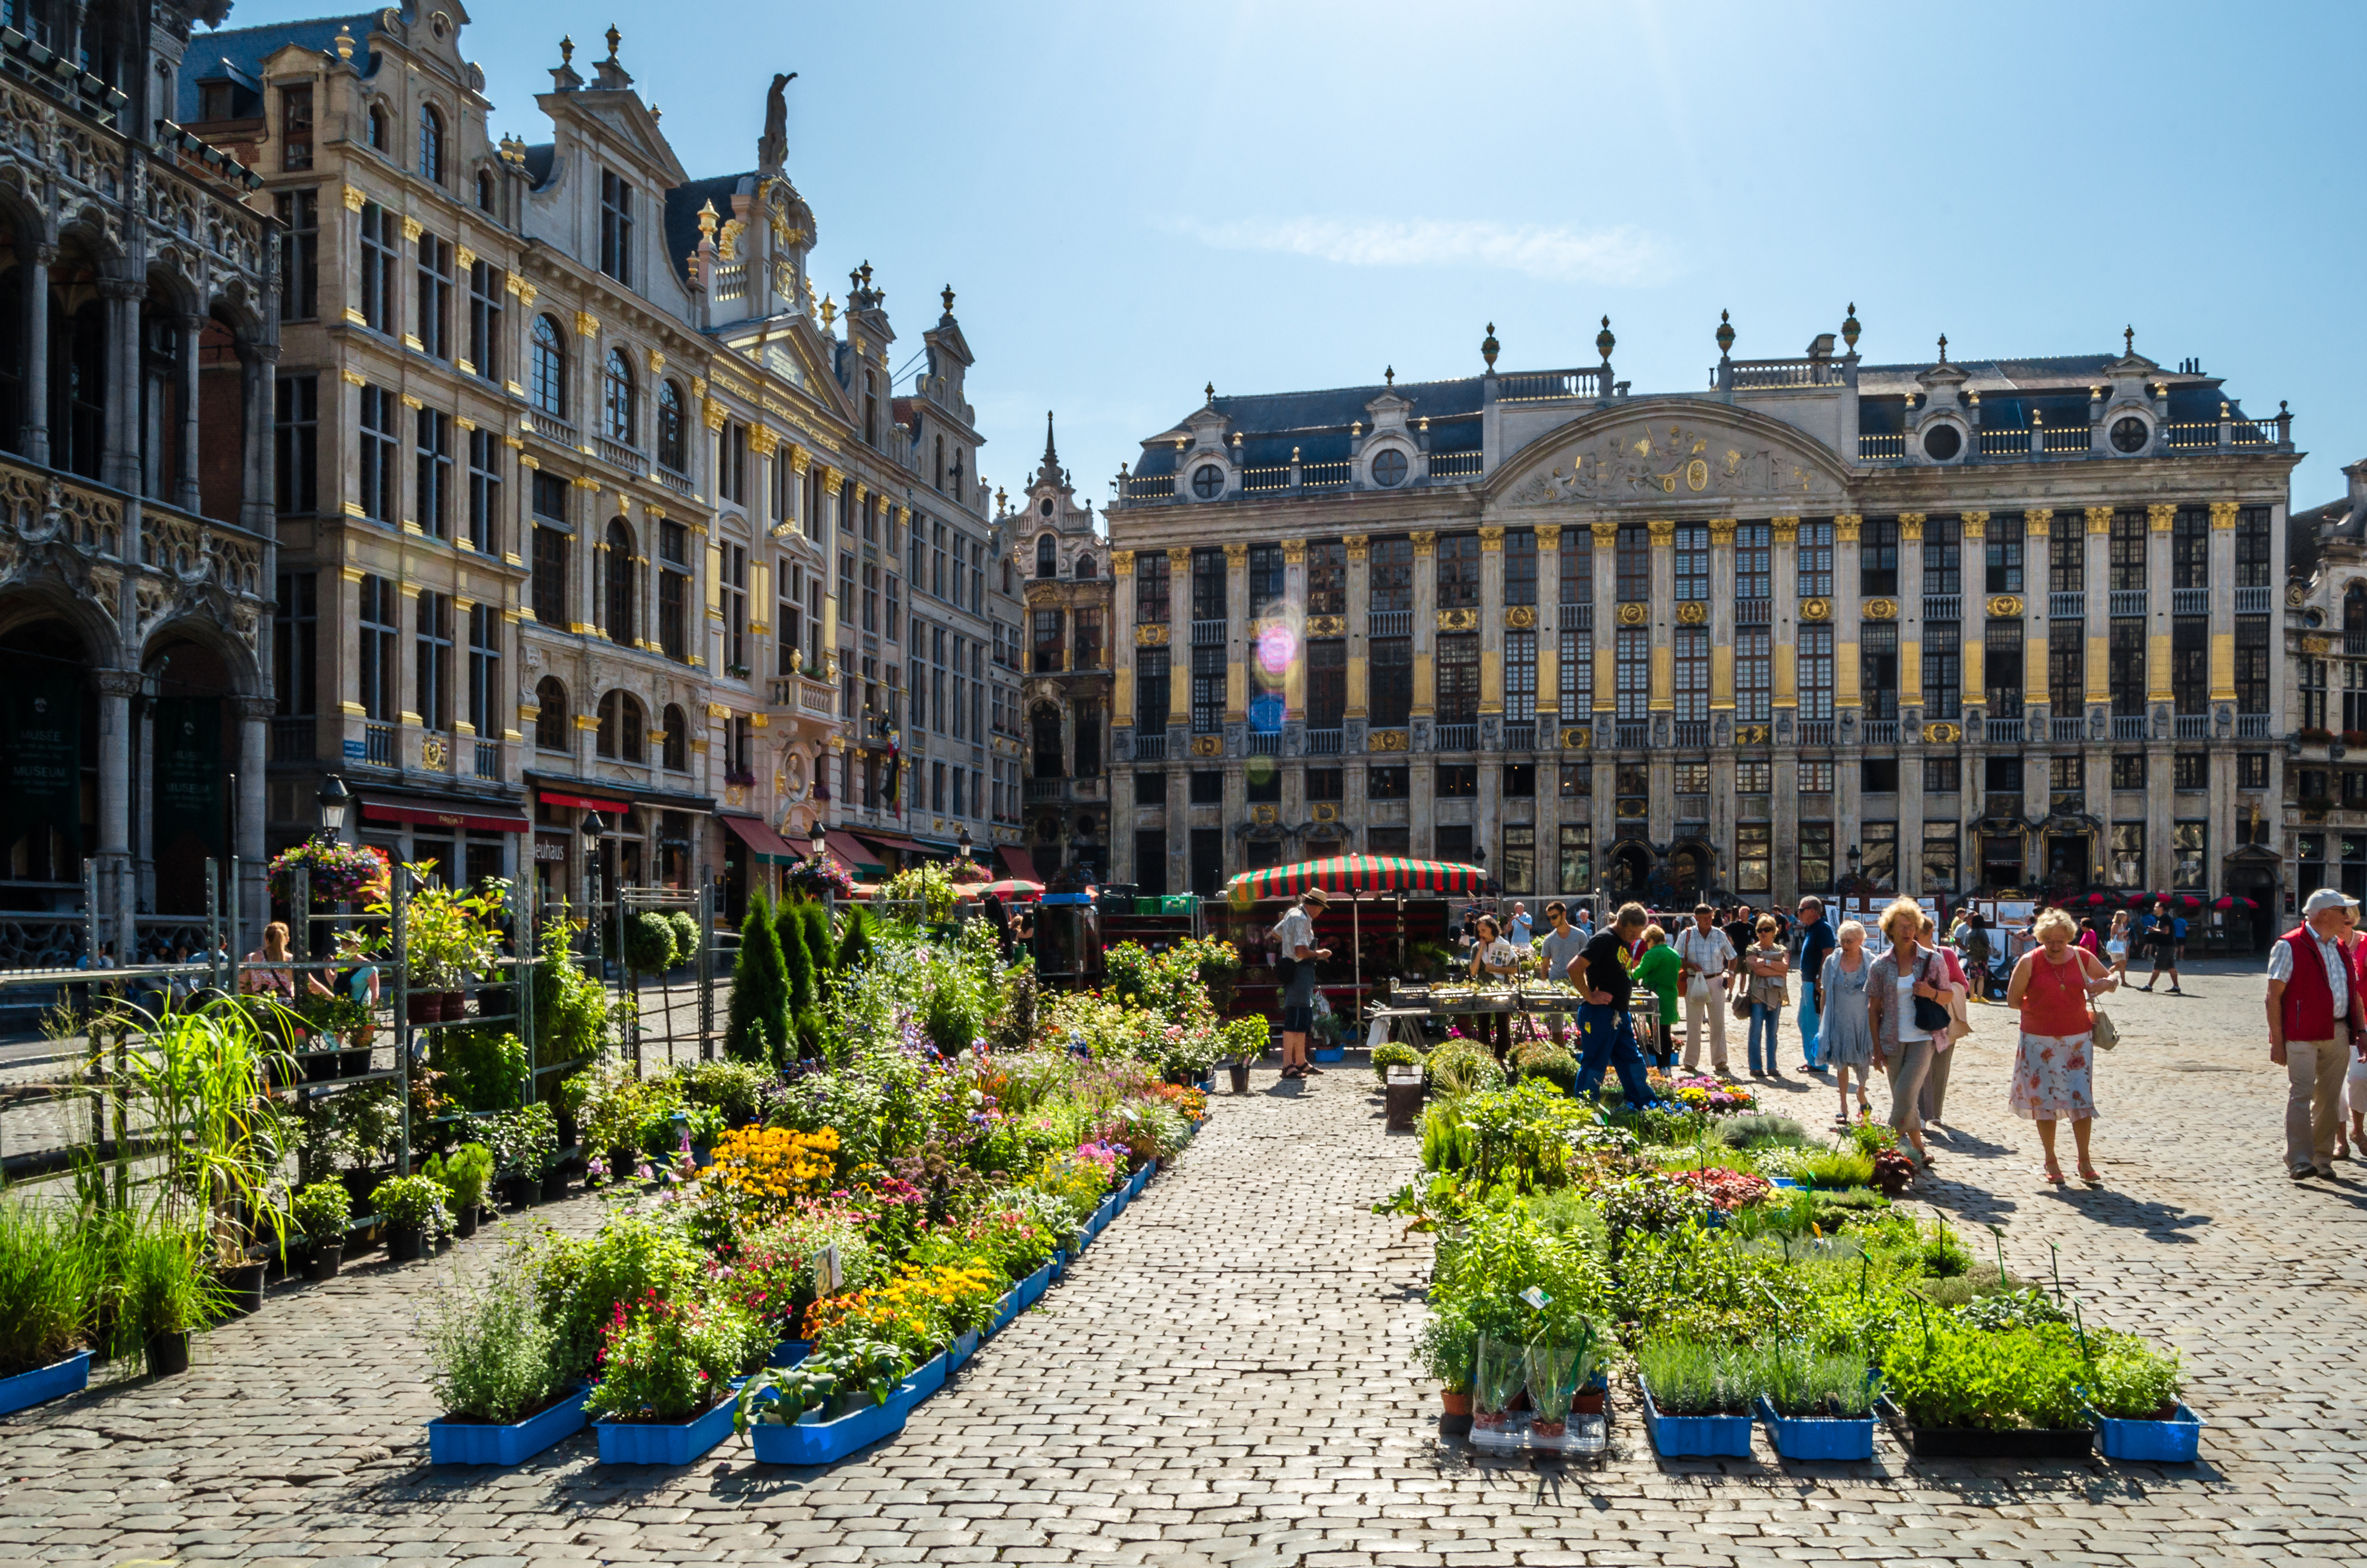 a flower market in front of the grand palace in brussels